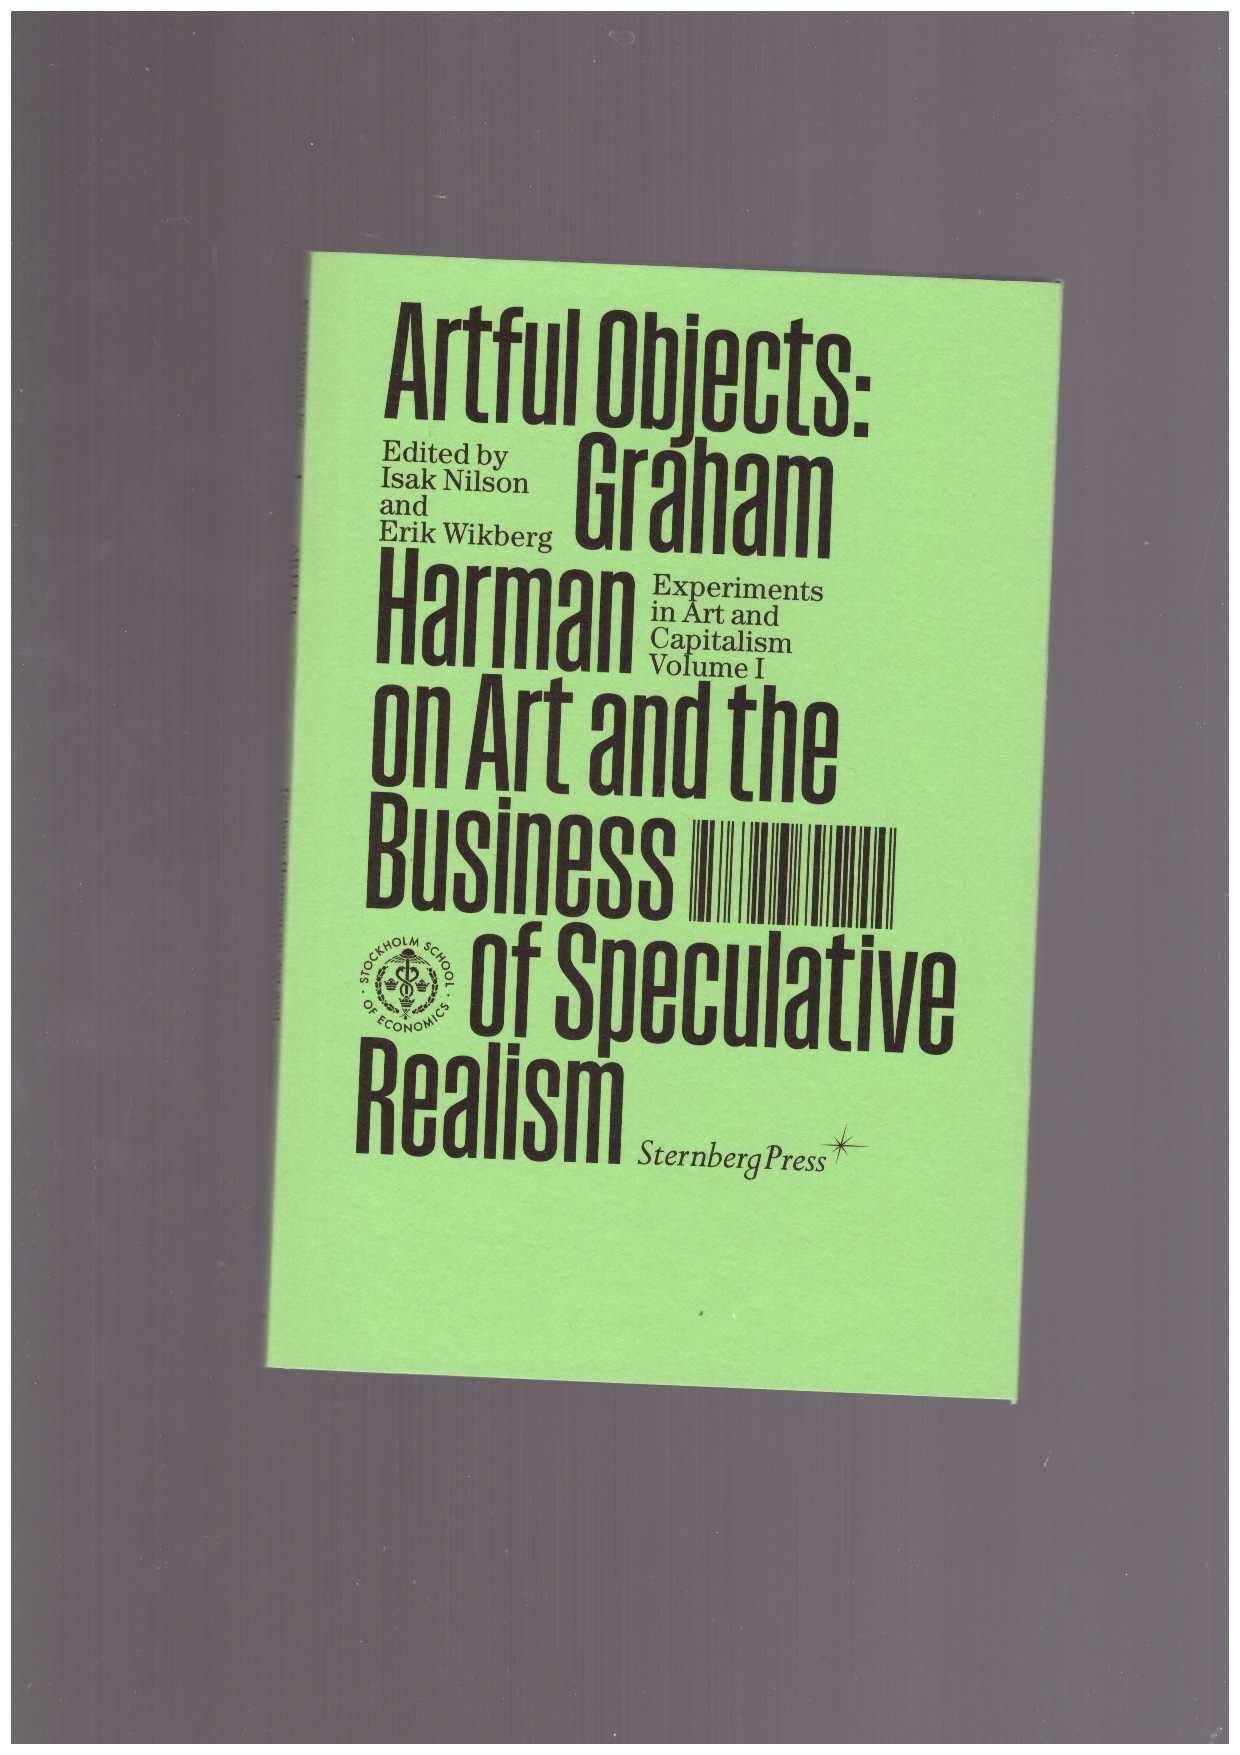 HARMAN, Graham  - Artful Objects – Graham Harman on Art and the Business of Speculative Realism